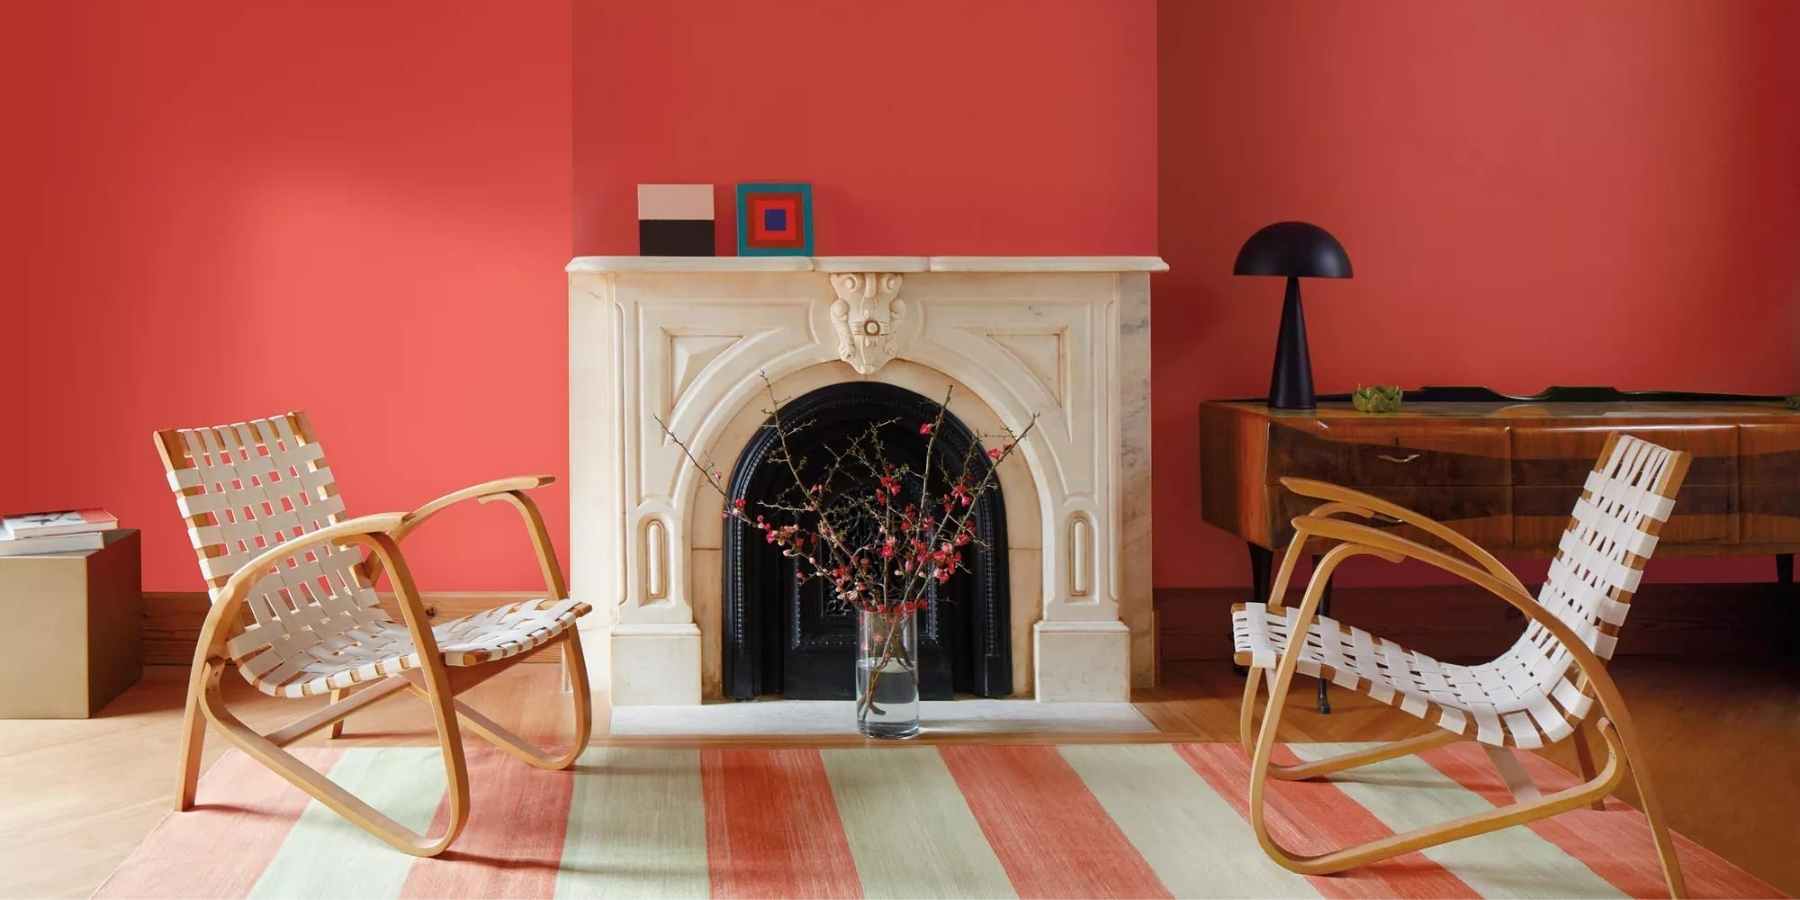 Find Benjamin Moore's Color of the Year at Anderson Paint in Michigan